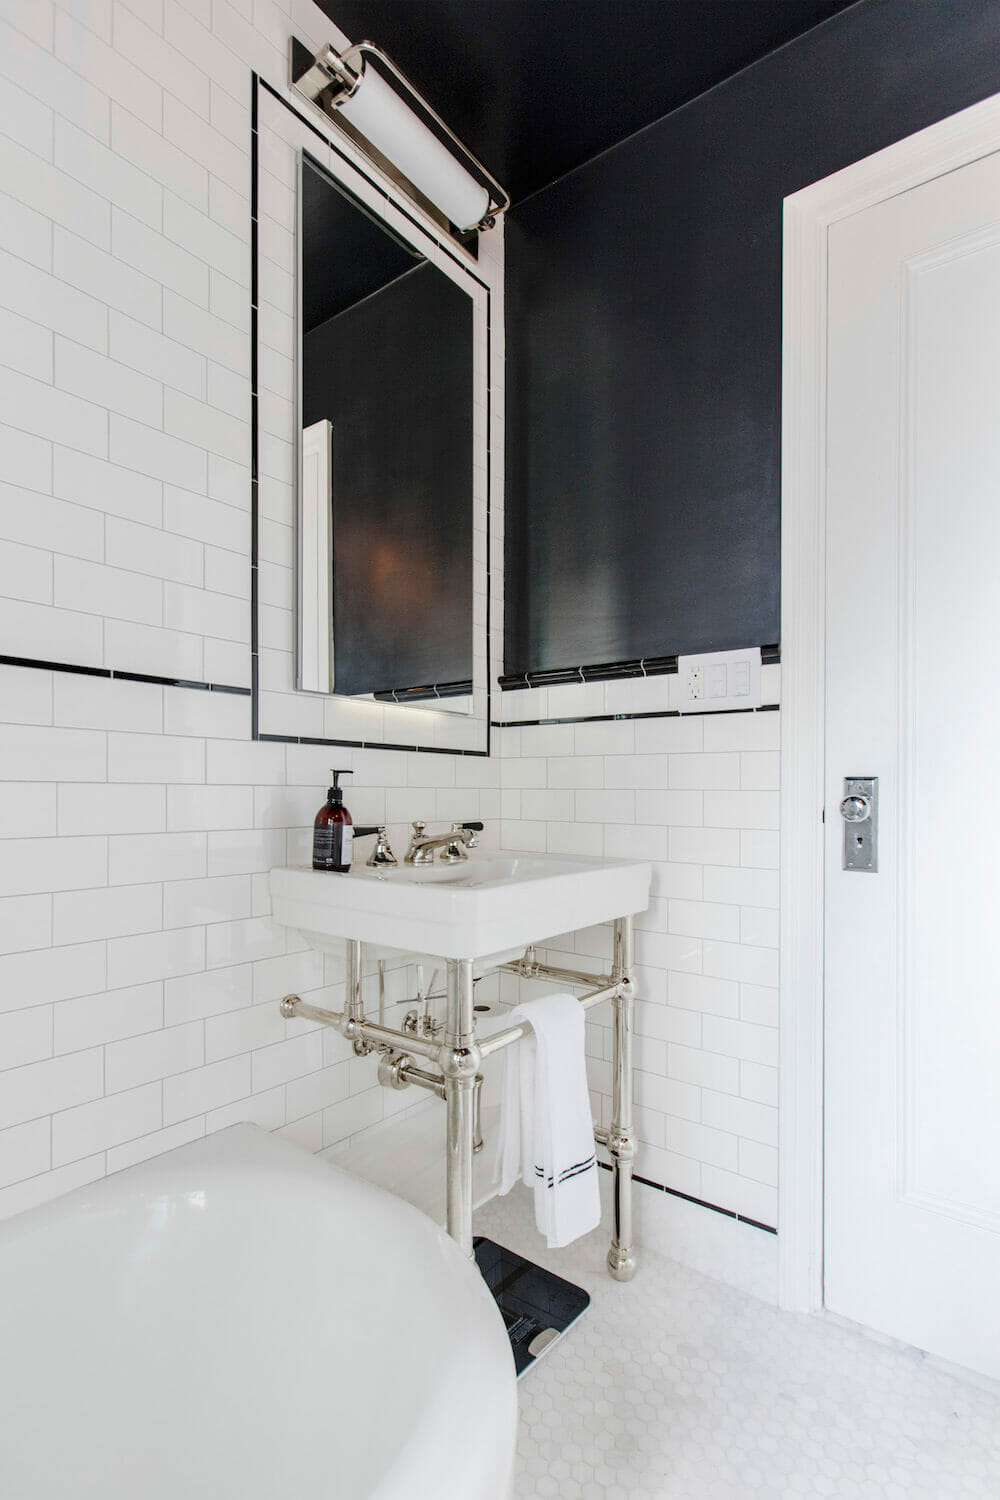 White pedestal sink with console legs in a white and black bathroom with large vanity mirror after renovation